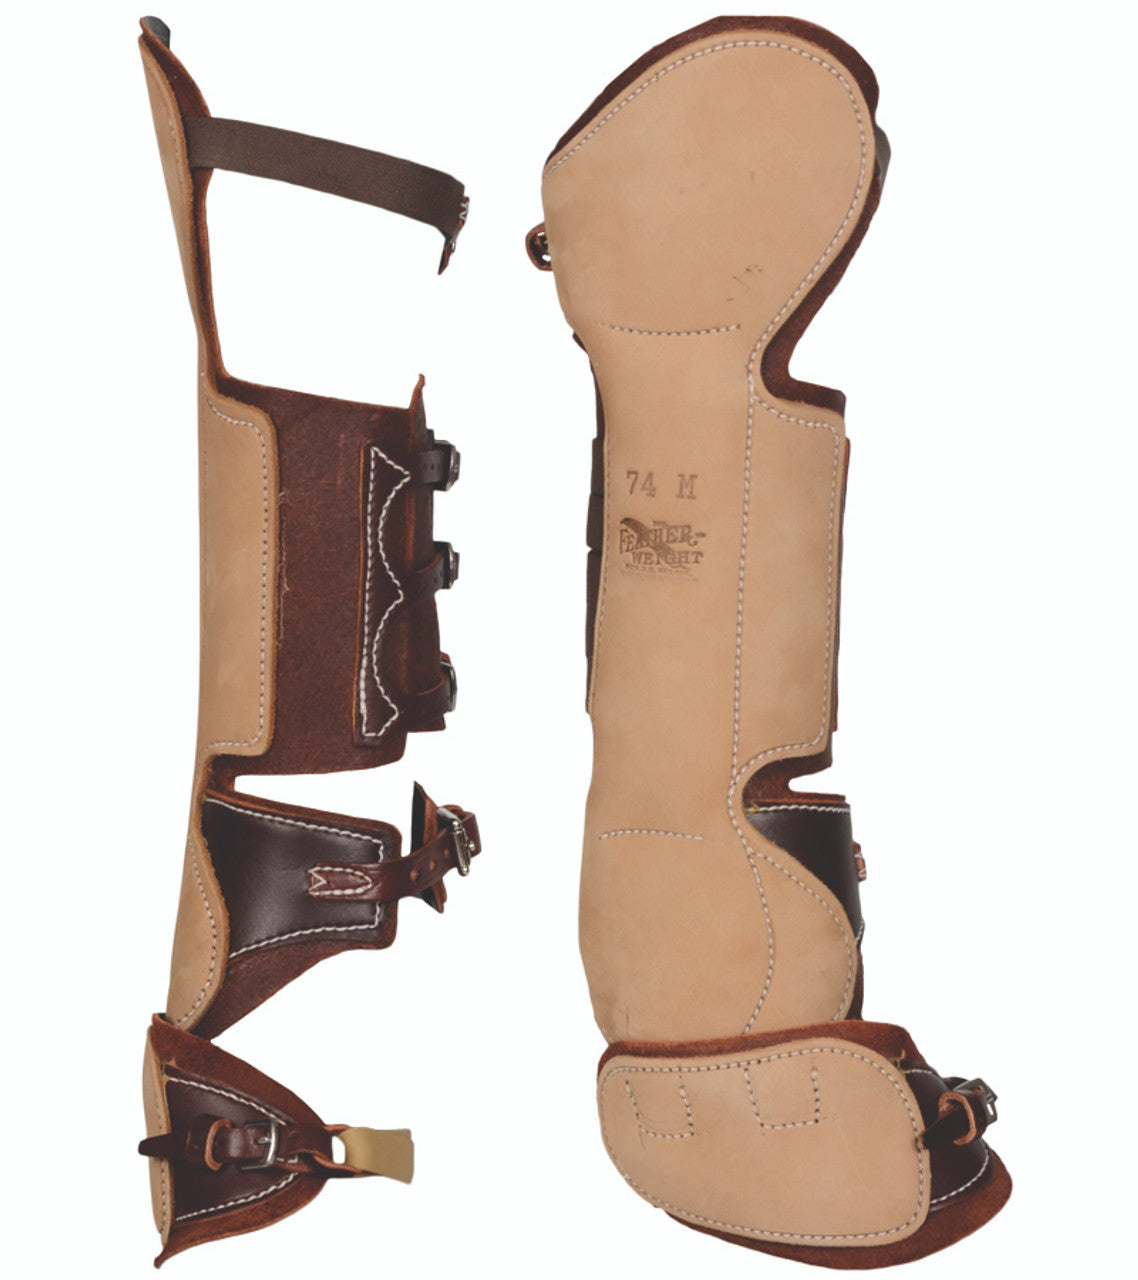 Feather-Weight Hock, Shin & Ankle Boots with Hinged Speedy Cut-TexanSaddles.com